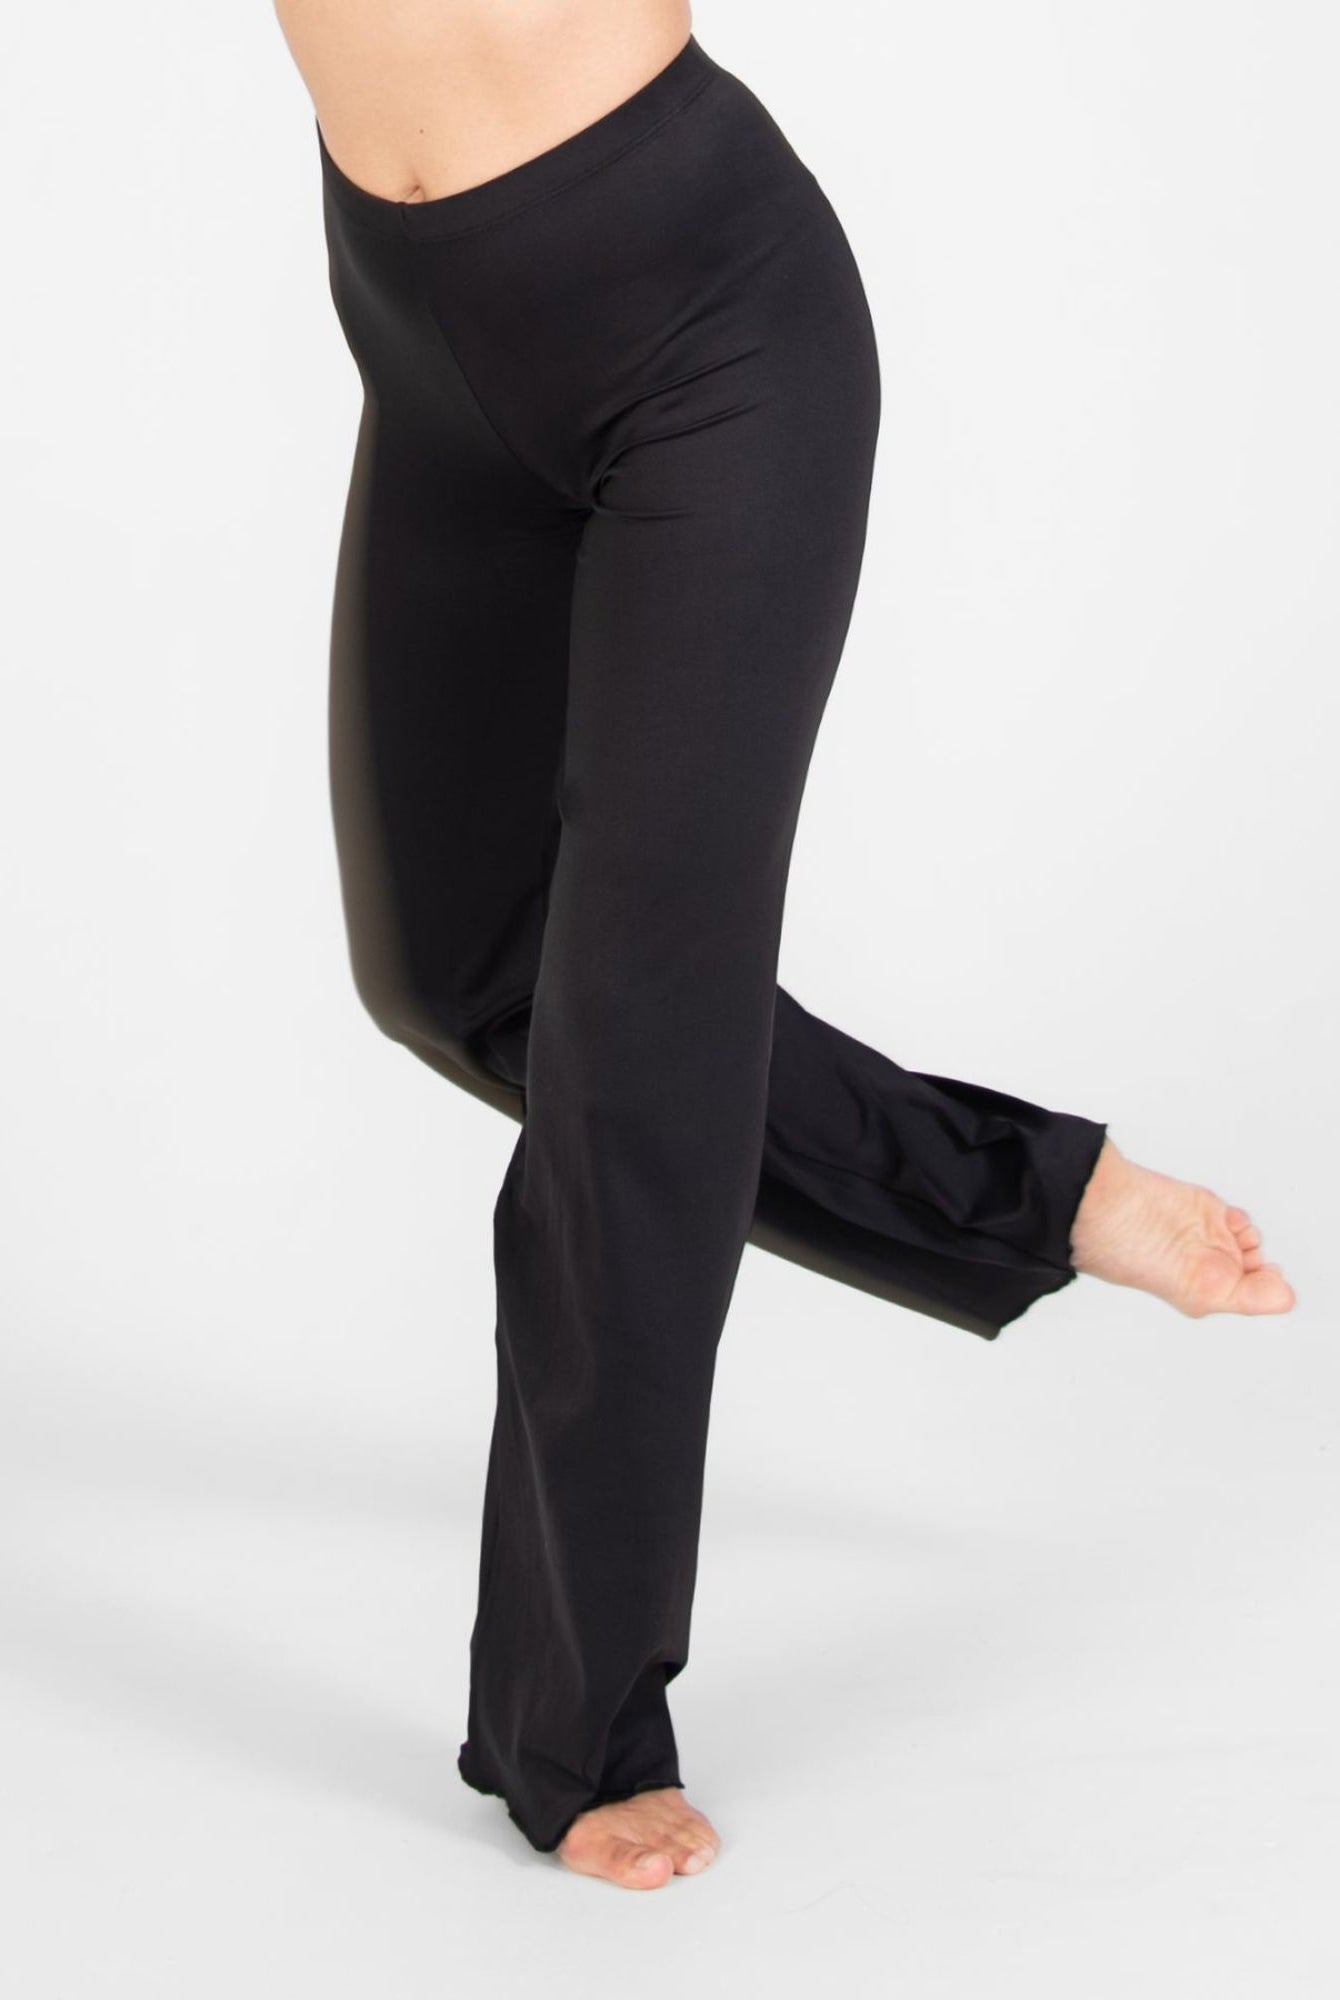 Body Wrappers BWP291 Jazz Pant Front Black